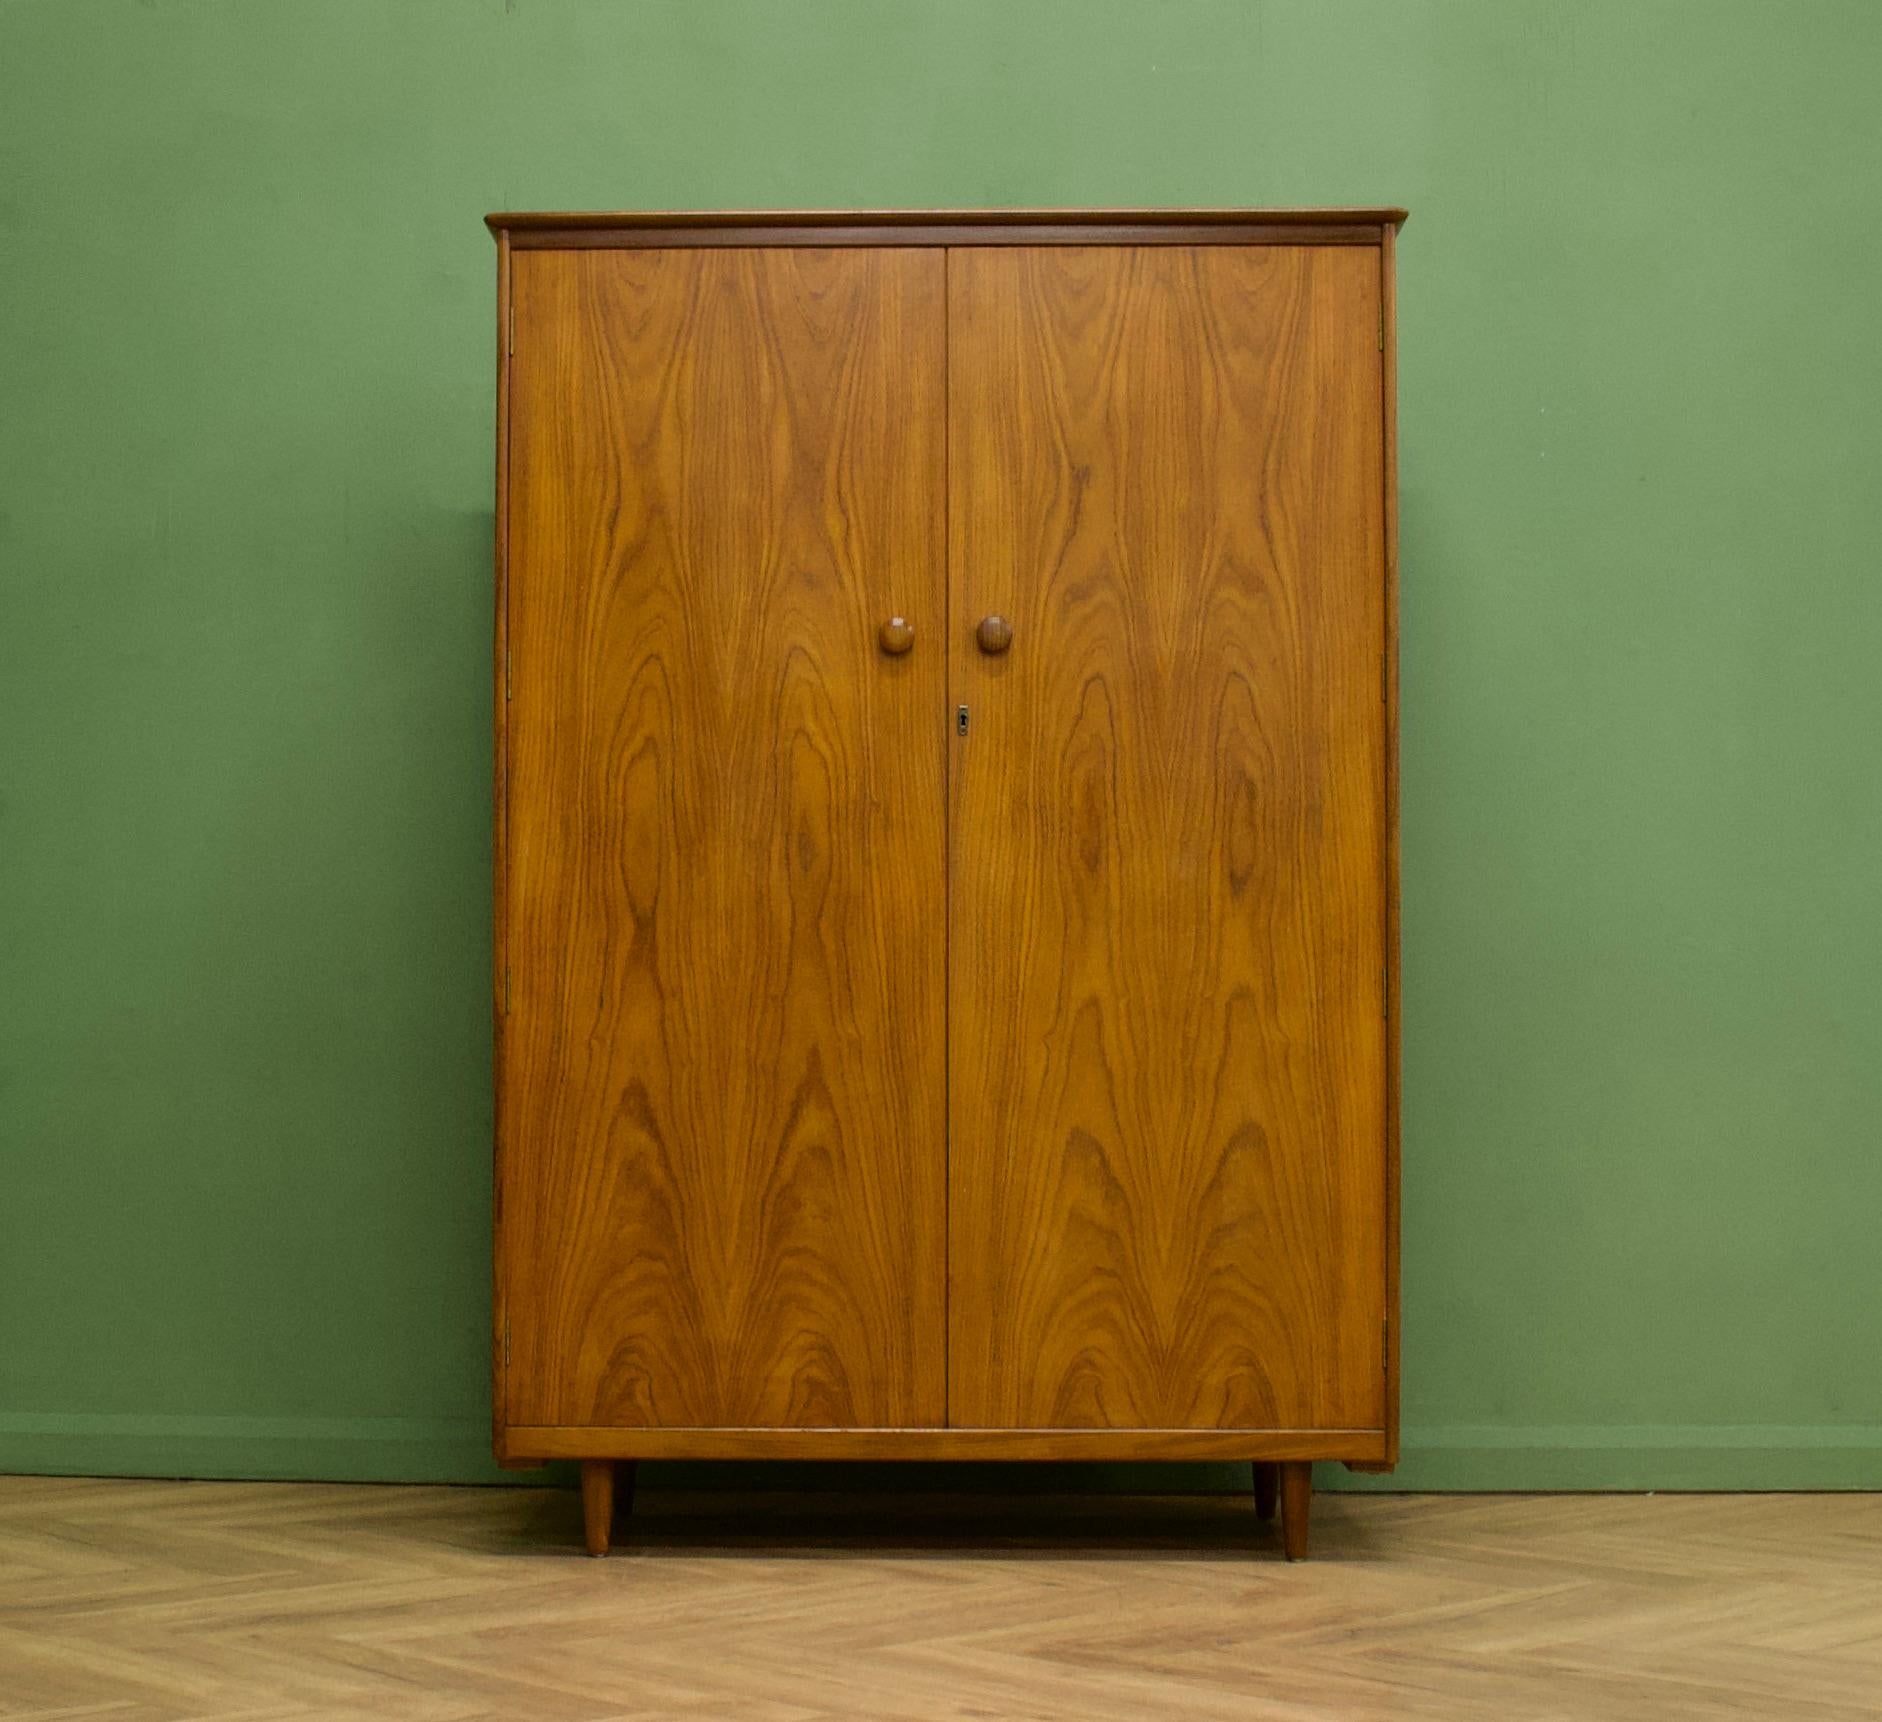 A walnut freestanding wardrobe by Butilux - circa 1960s
Internally there is are two rails and a shelf
The attractive legs are slightly tapered and the handles are solid wood - complete with a working lock (new replacement)


This wardrobe can be